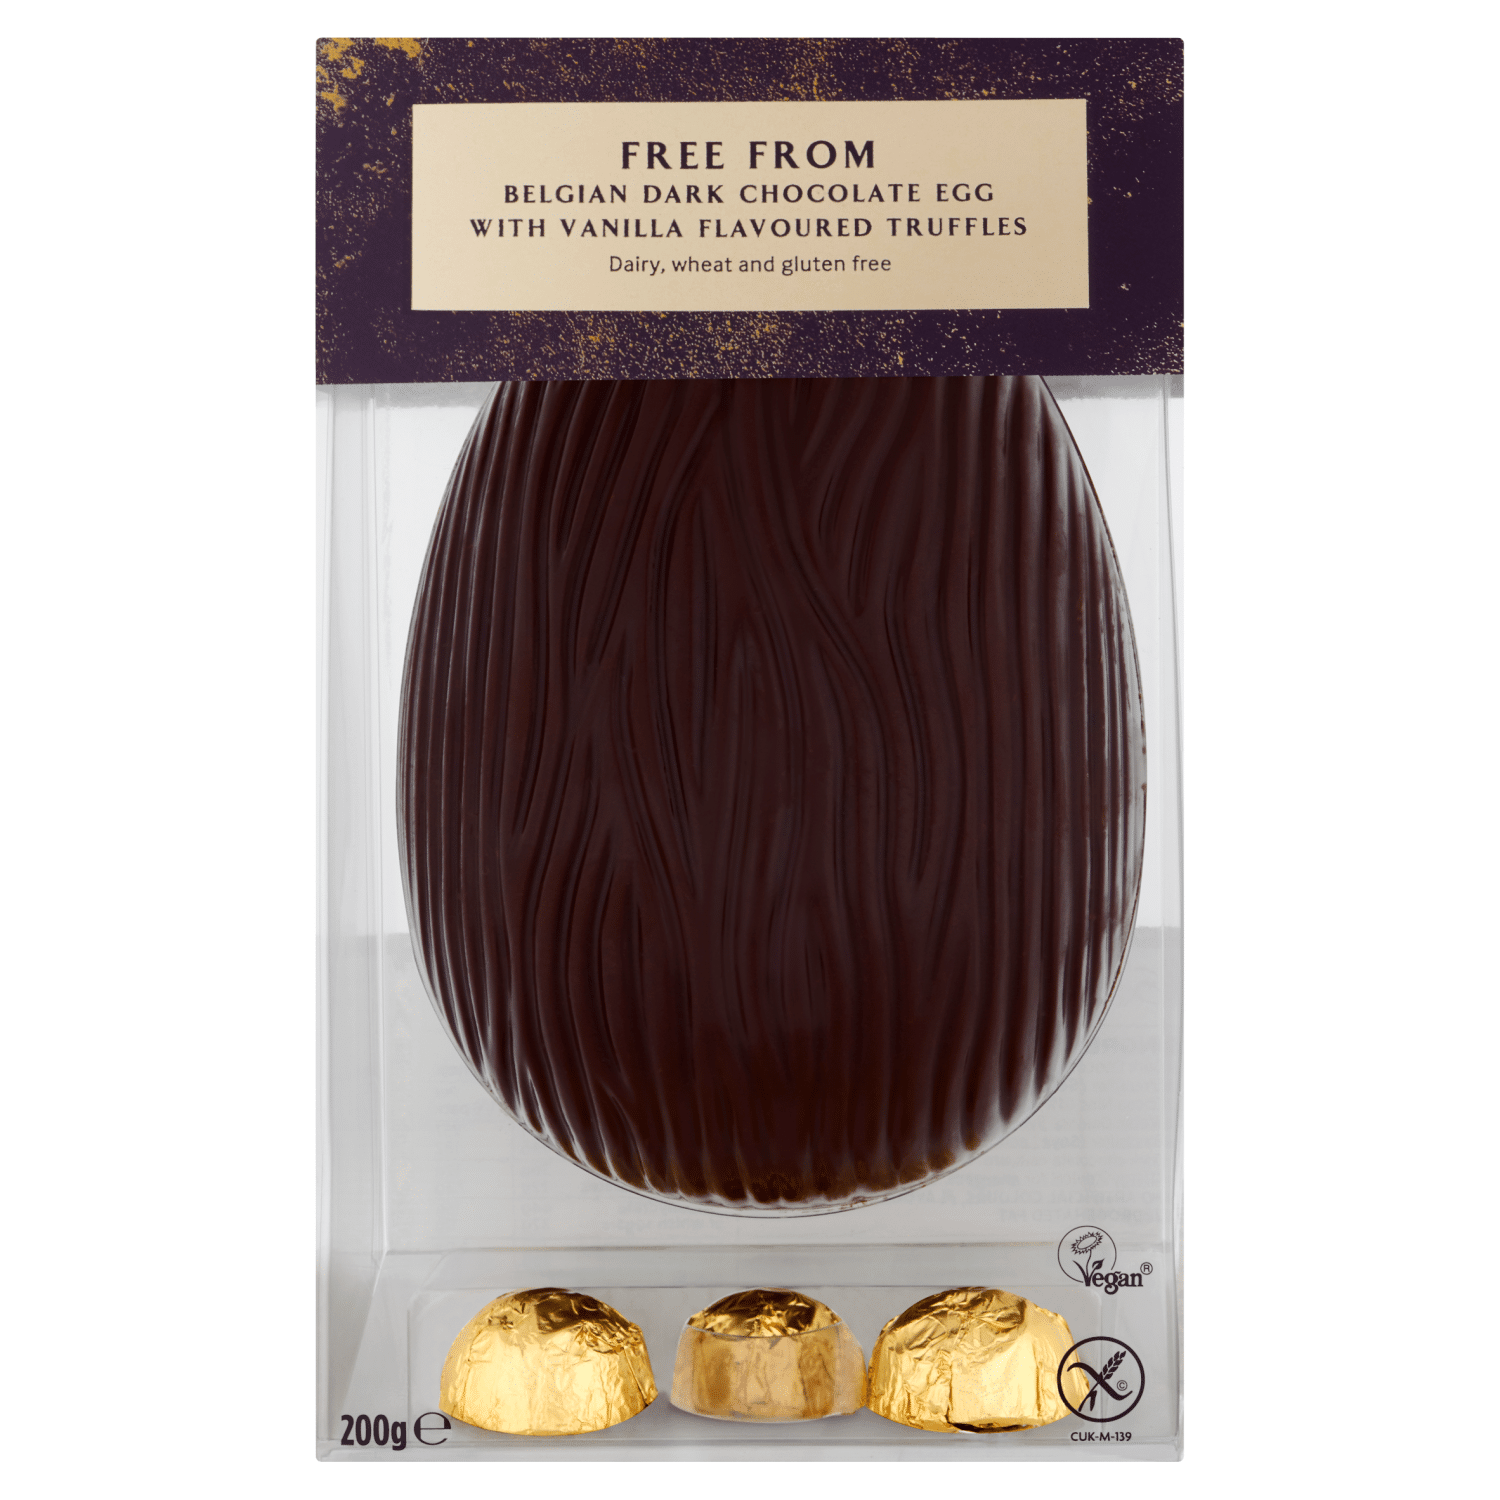 Easter Eggs - ASDA_Extra Special Free From Belgian Dark Chocolate Egg with Vanilla Flavoured Truffles